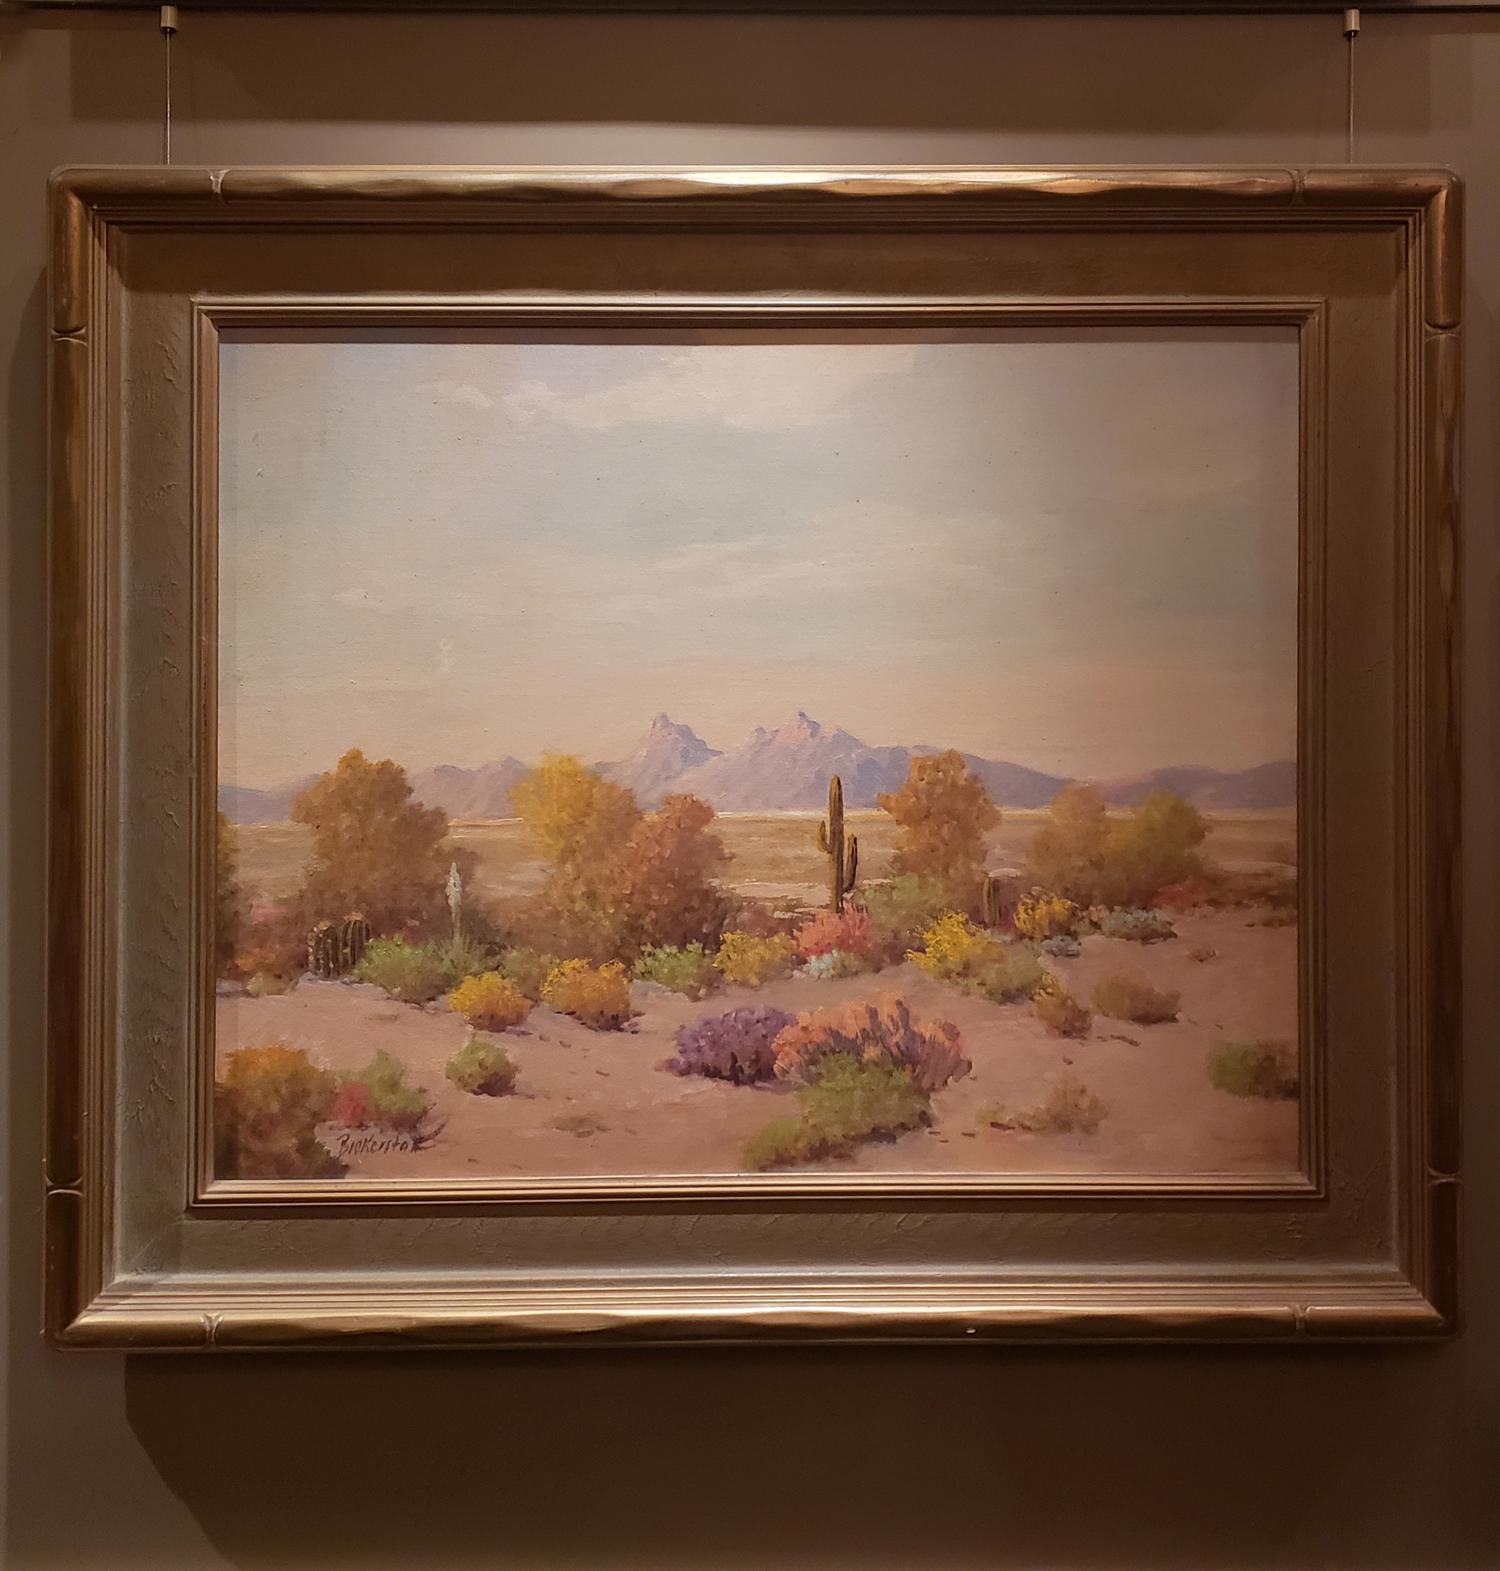 Provenance
Consigned to the gallery by a private collector in Irvine, California

Description
This original oil painting by George S. Bickerstaff, circa 1940, represents an enigmatic Arizona desert scene that links the viewer to the Old West. The